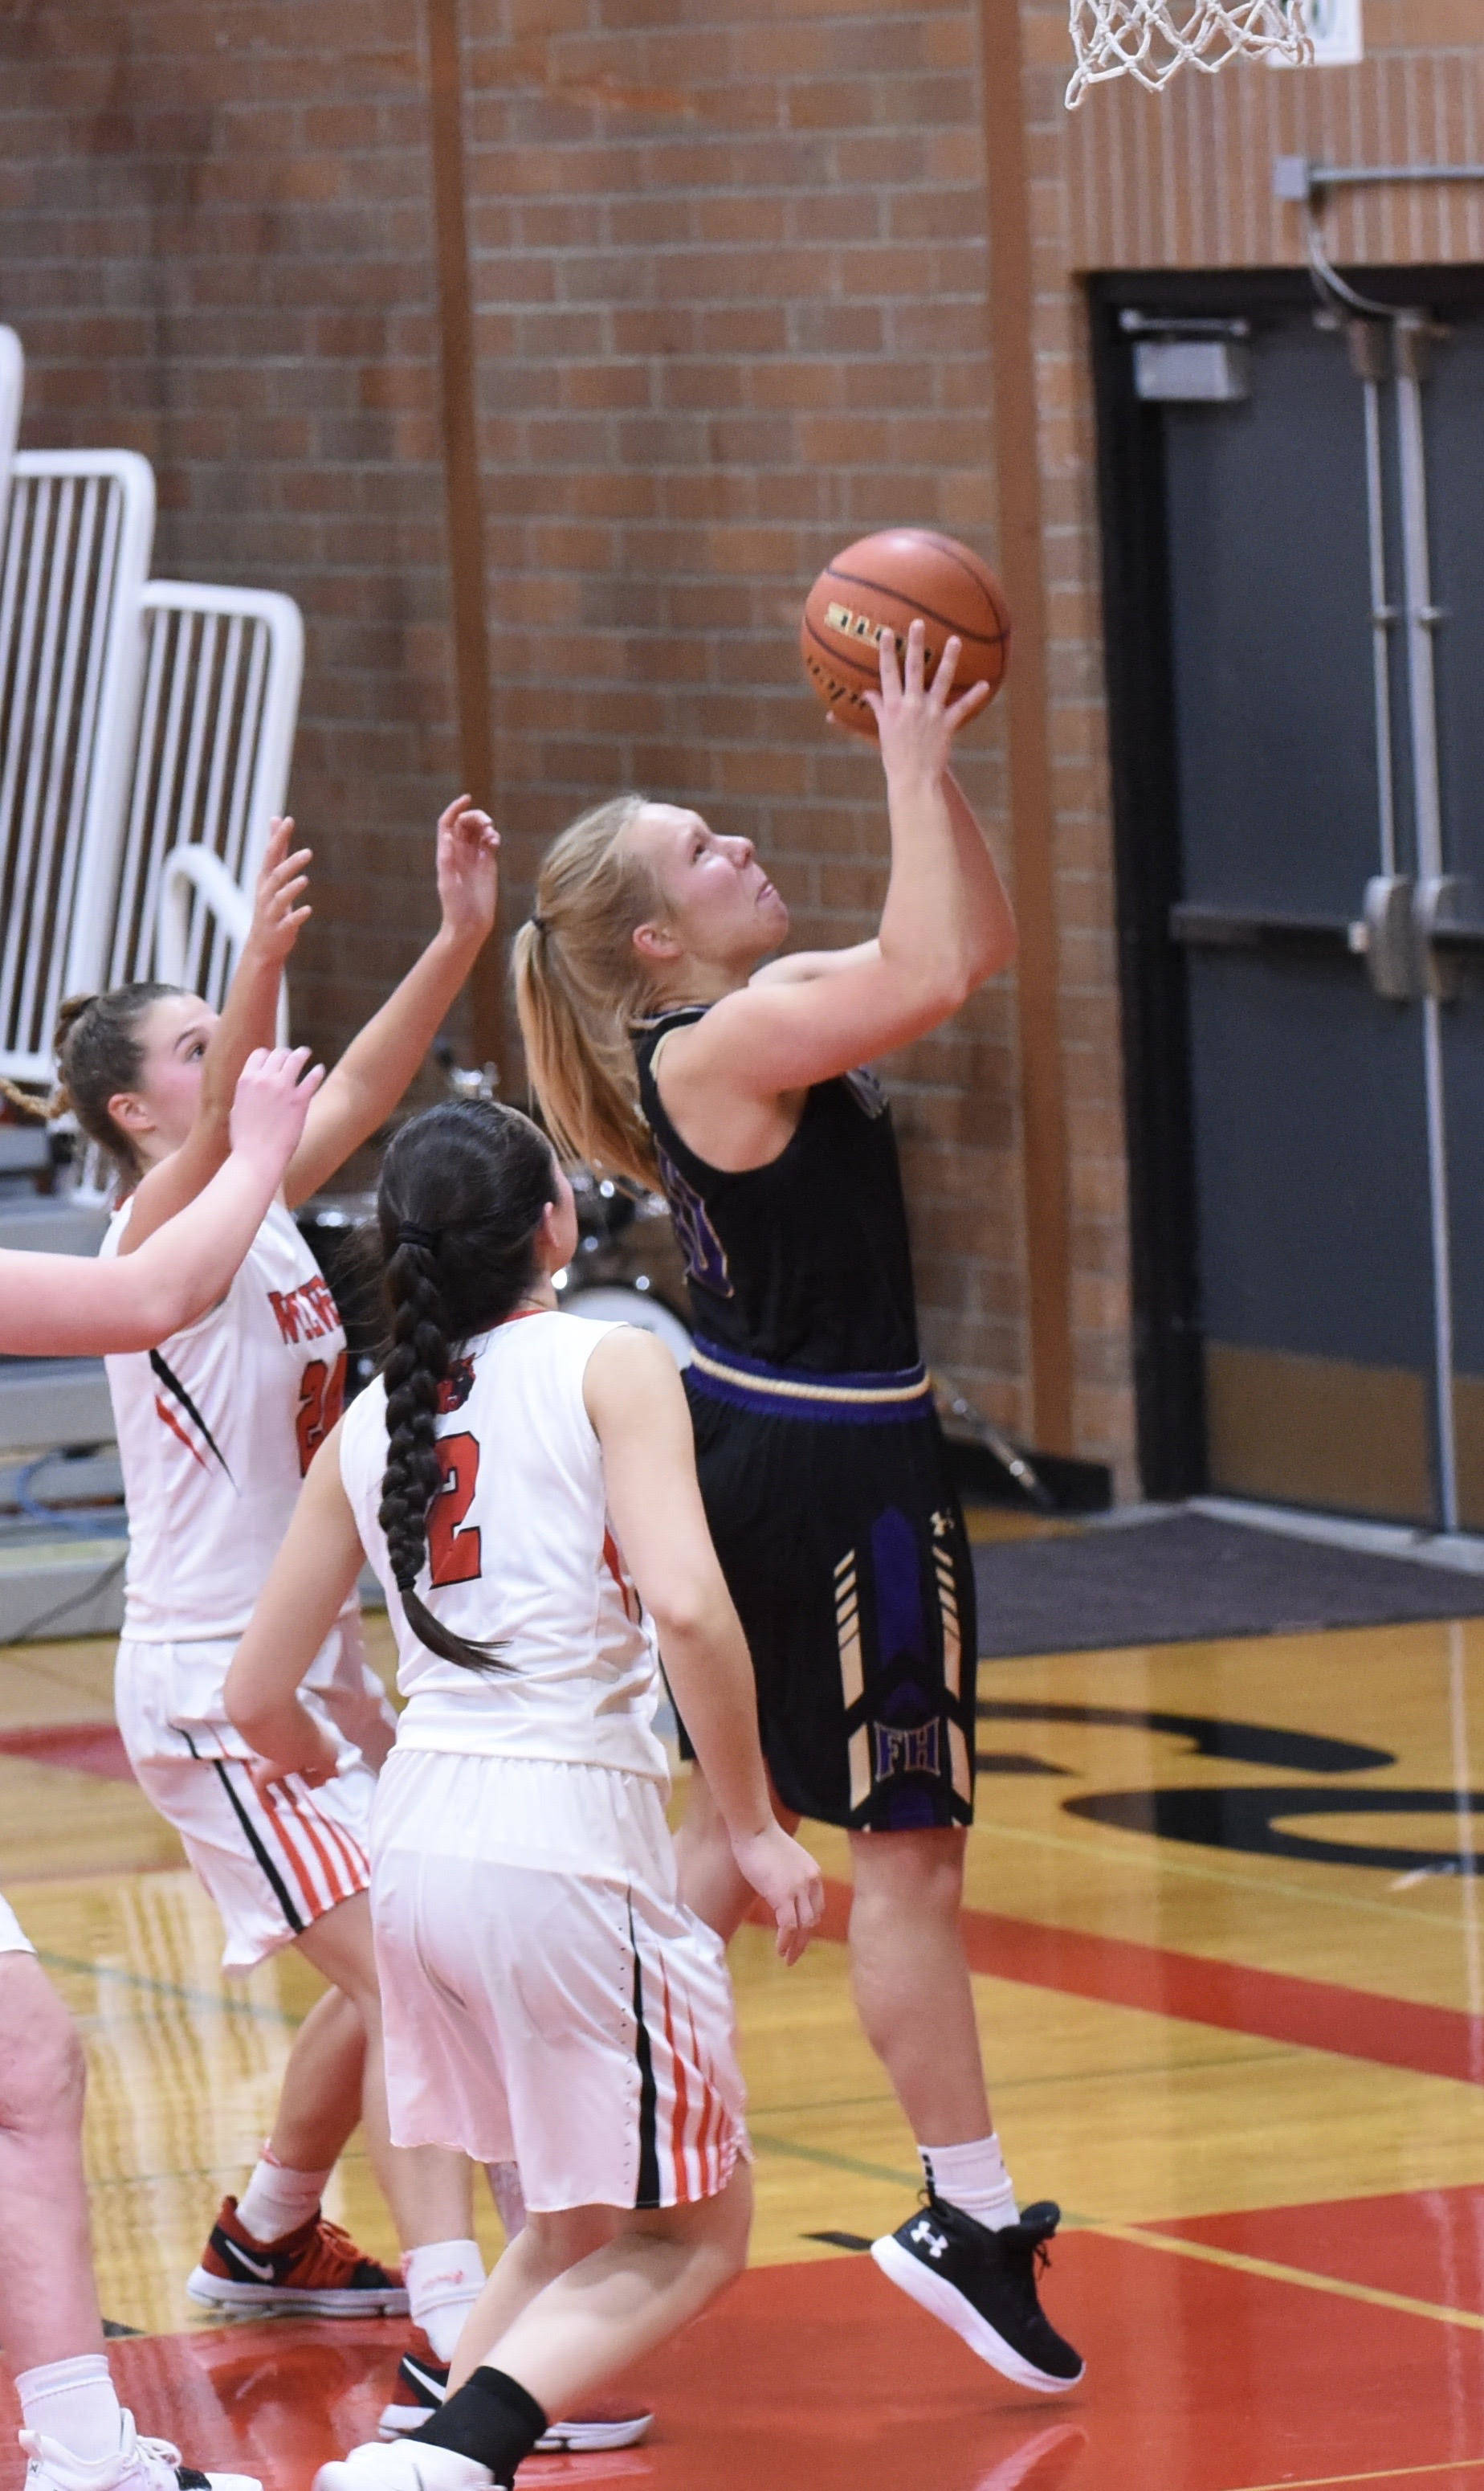 Contributed photo/John Stimpson                                Tori Polda goes up for two points.